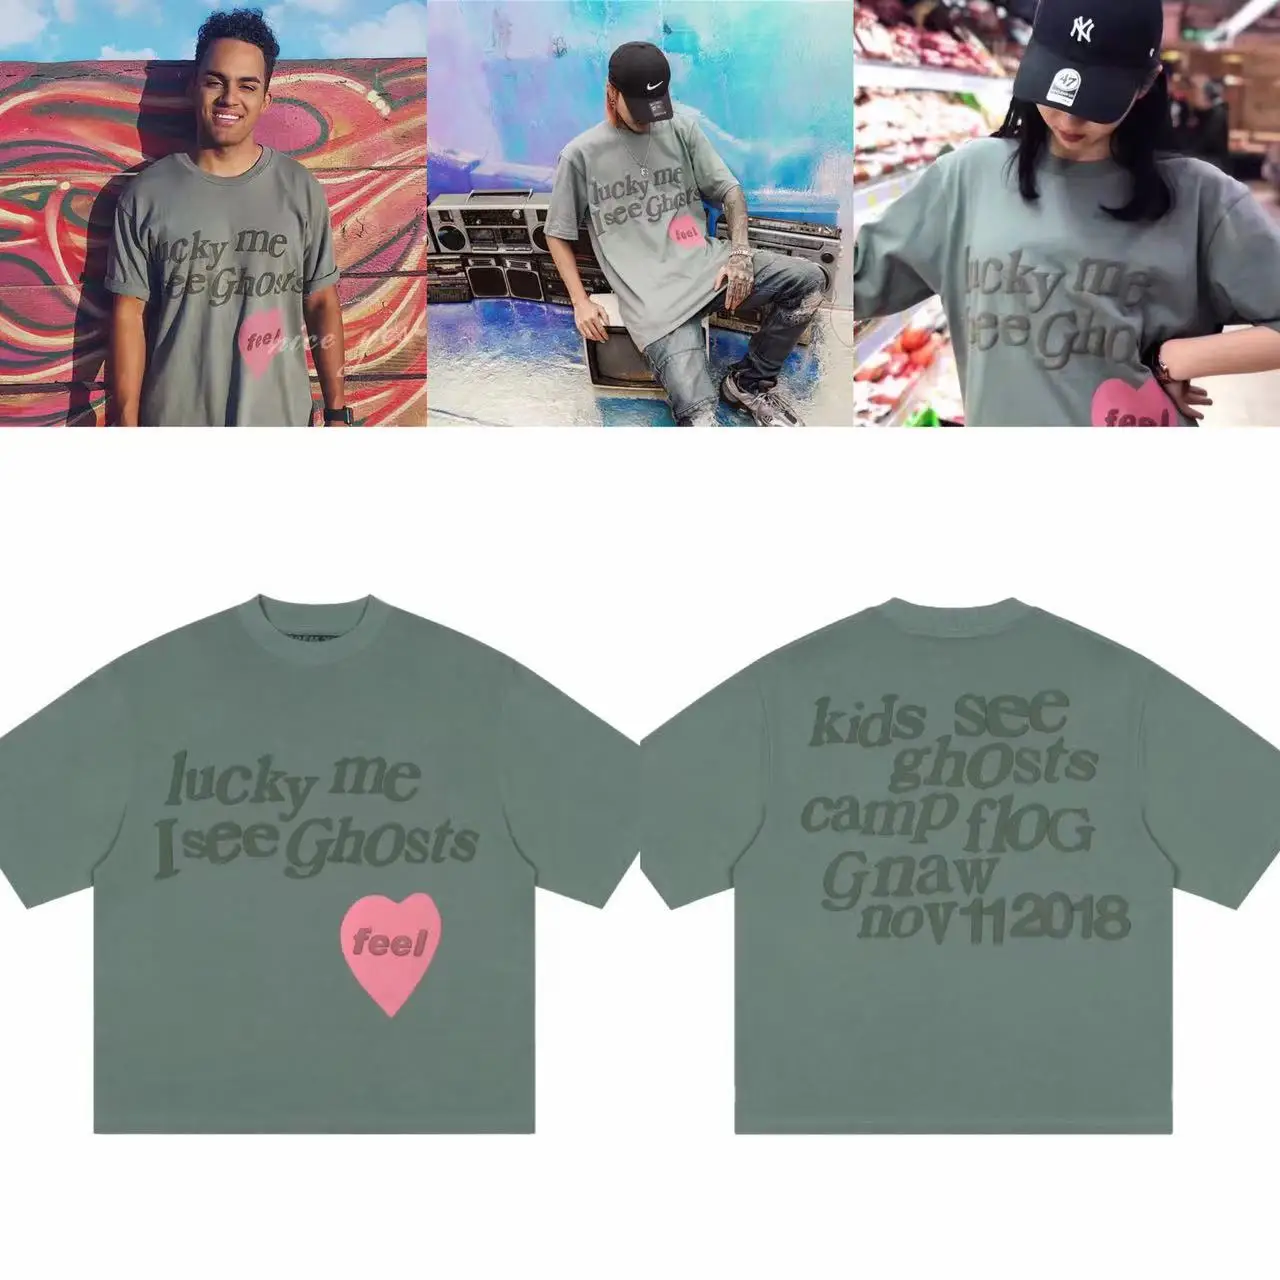 

Kanye West T-shirt Trust God T Shirt Sunday Service Men Women Lucky My I See Ghost Top Tees